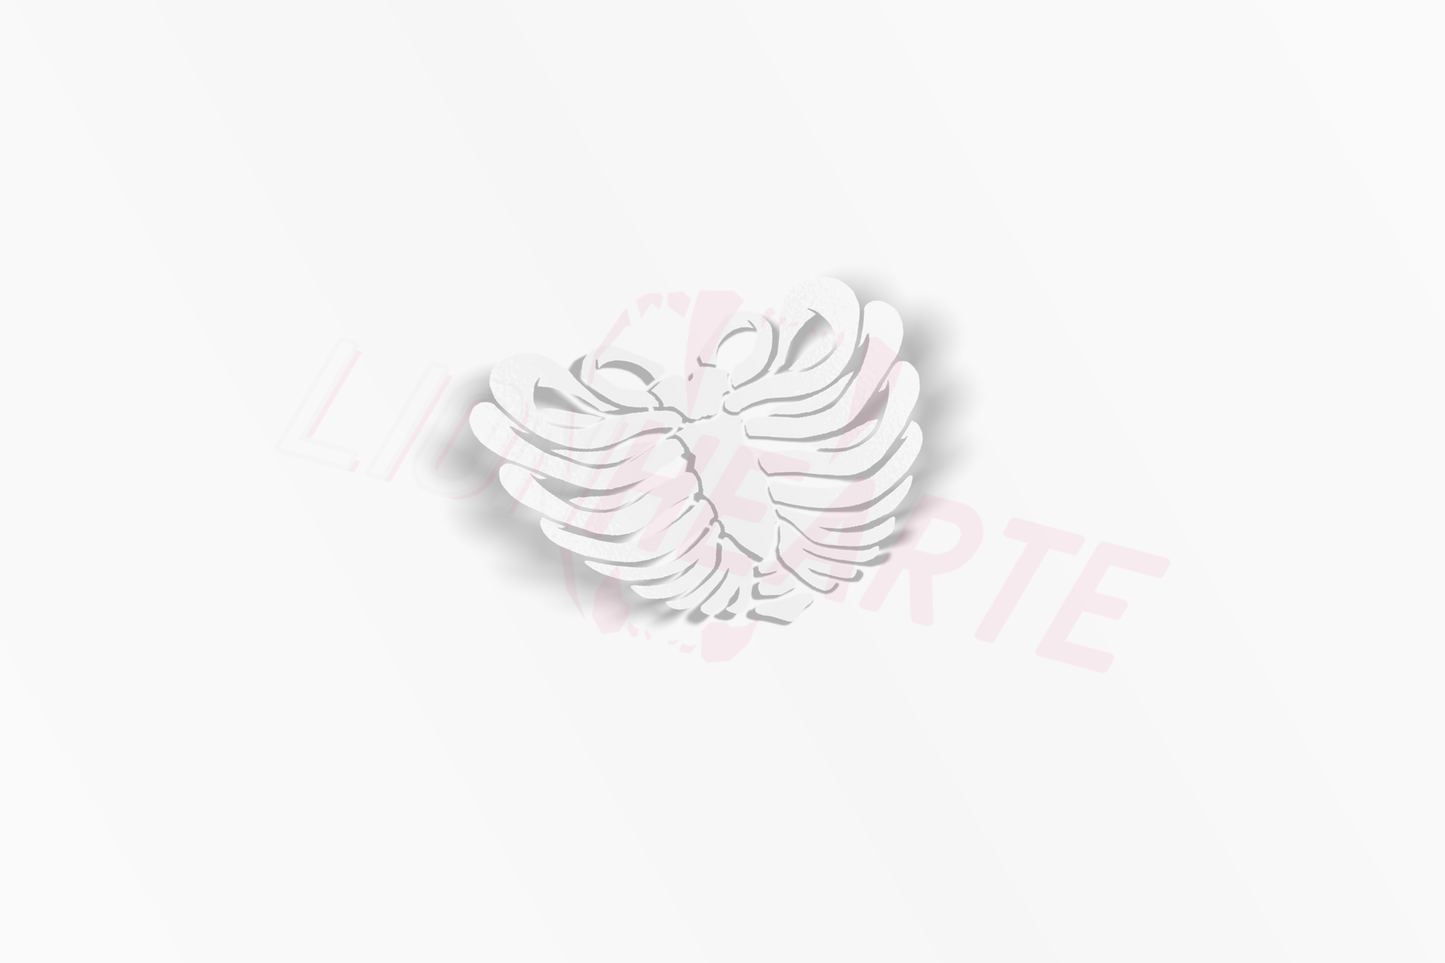 Ribcage Heart Decal